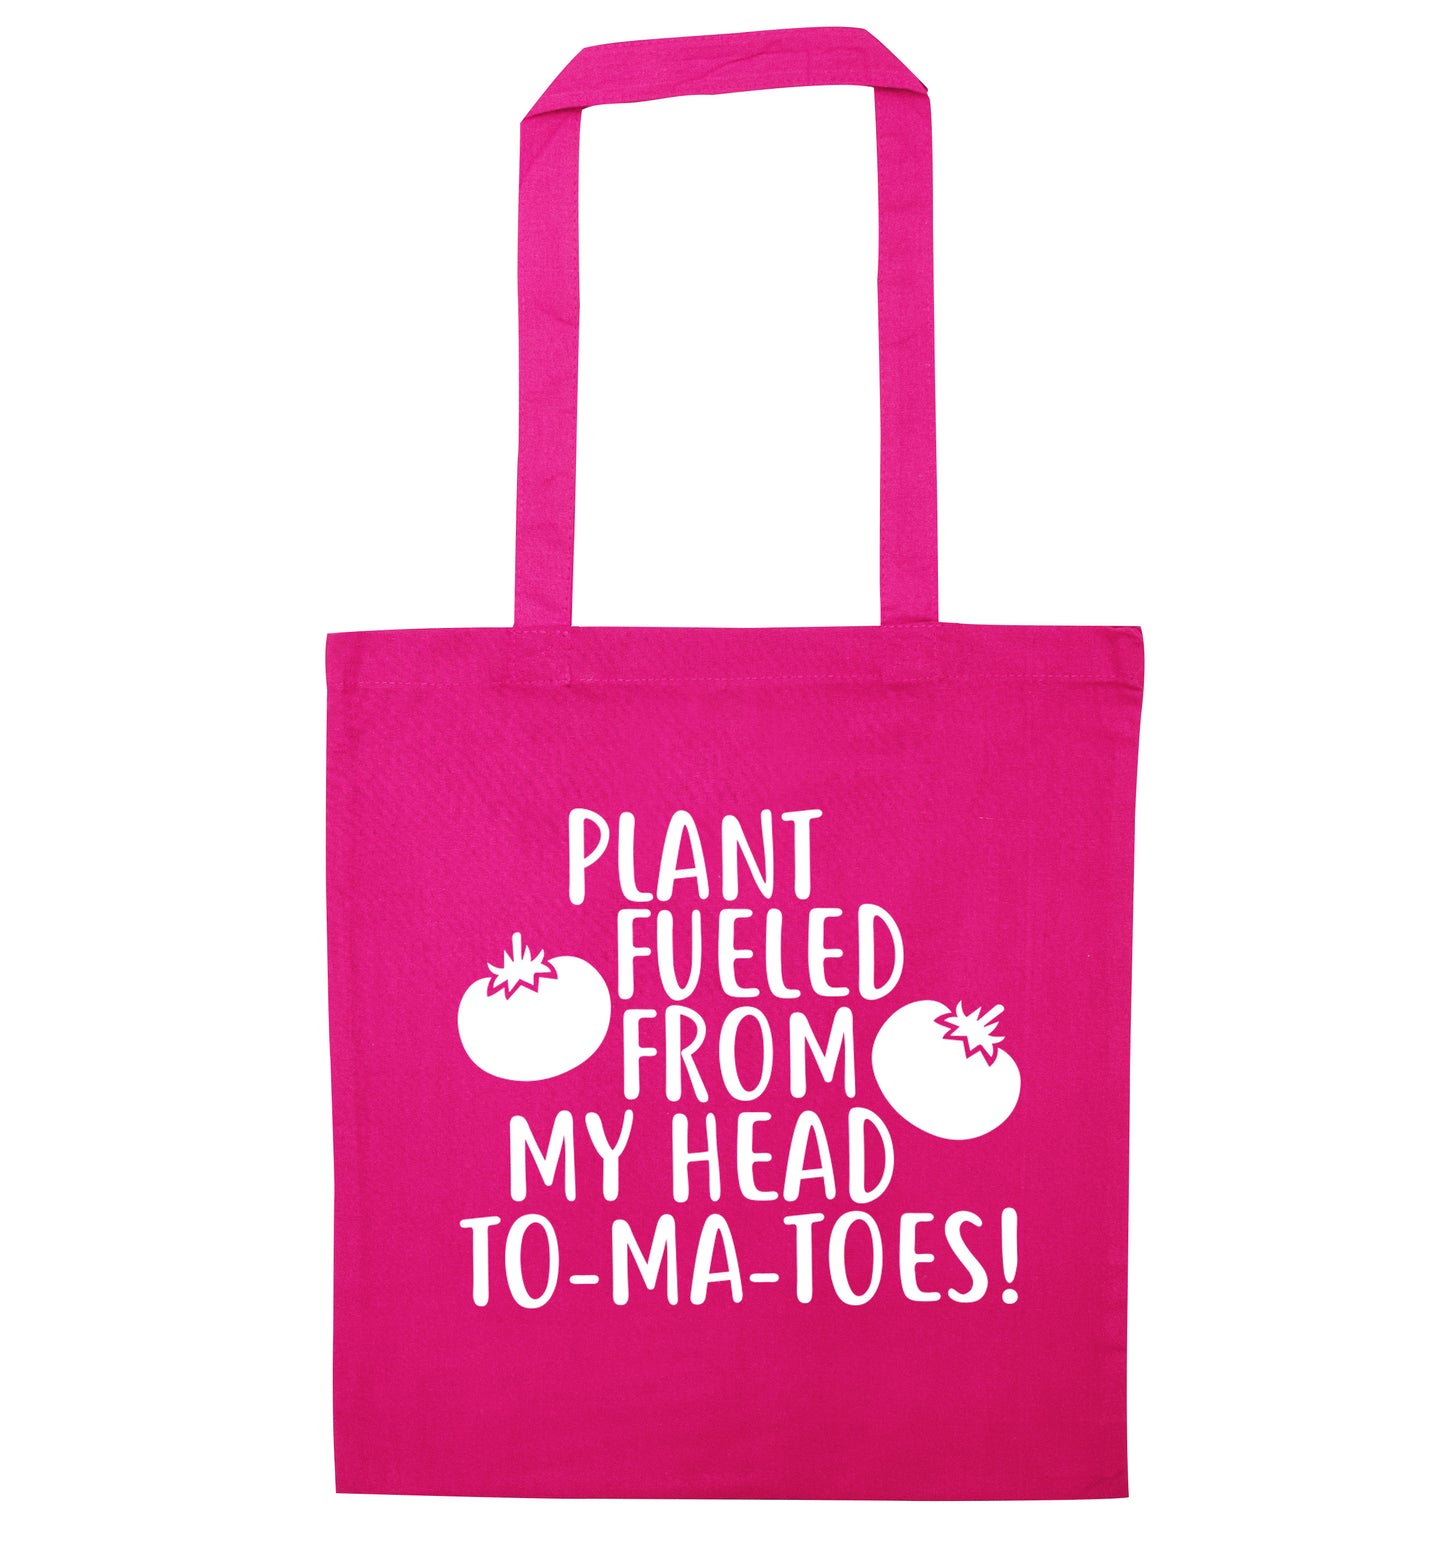 Plant fueled from my head to-ma-toes pink tote bag